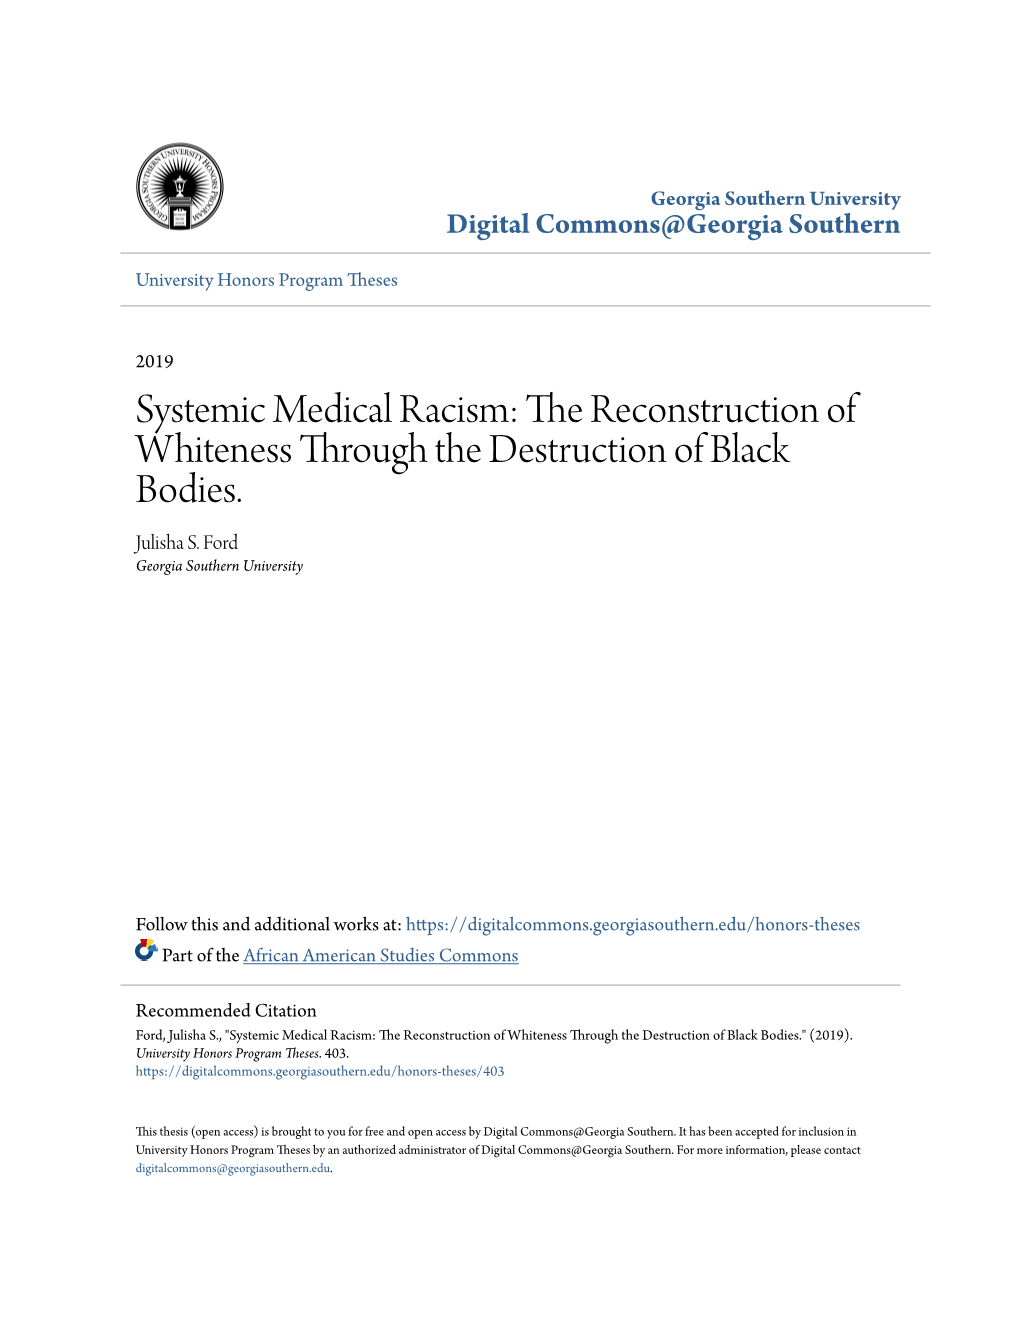 Systemic Medical Racism: the Reconstruction of Whiteness Through the Destruction of Black Bodies